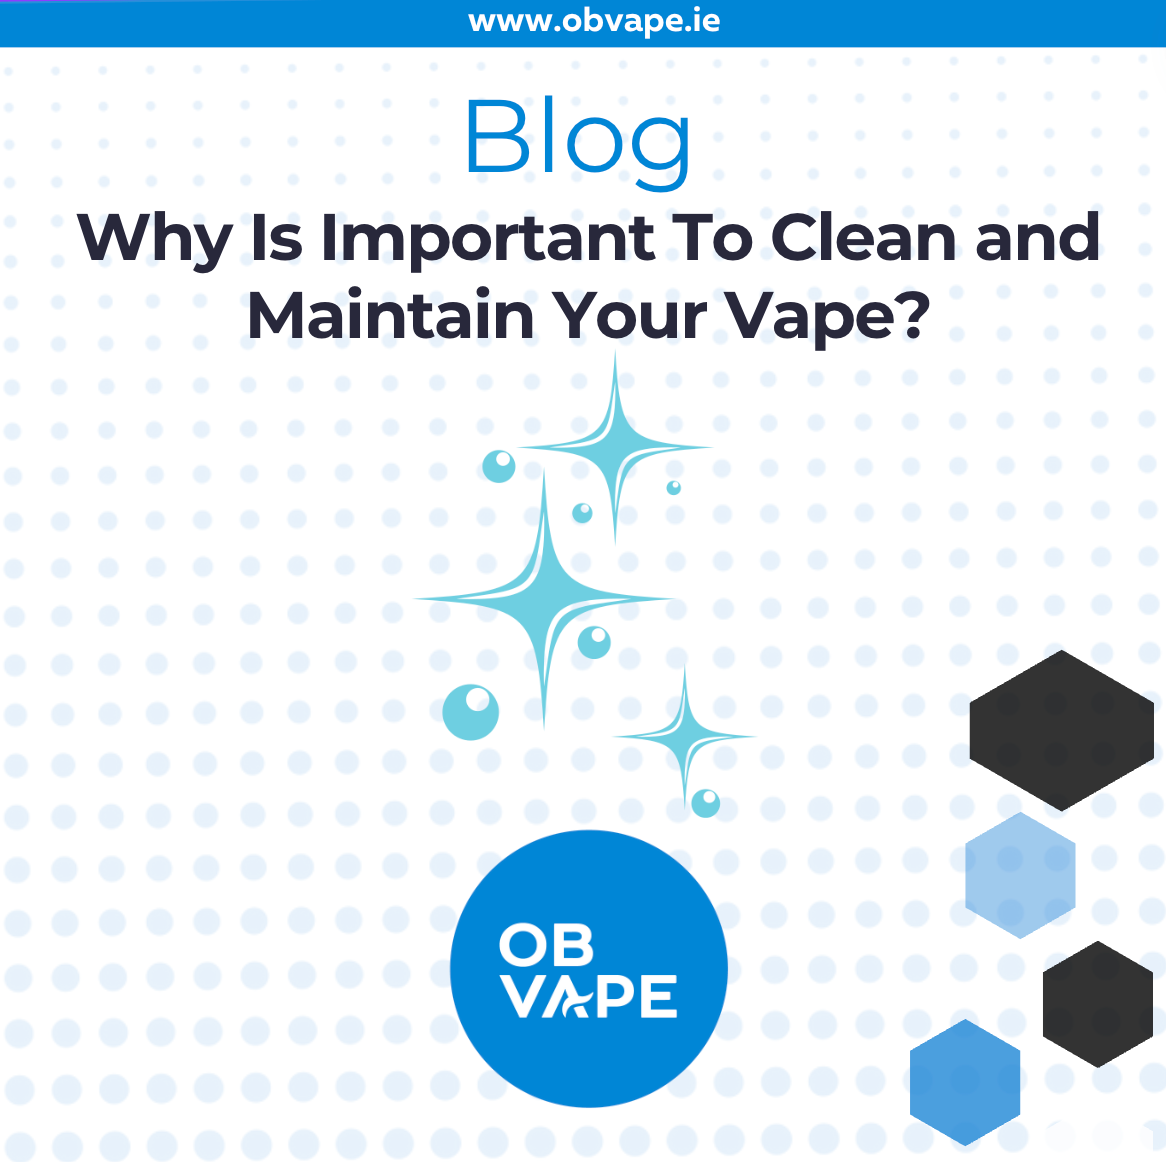 Why Is Important To Clean and Maintain Your Vape?